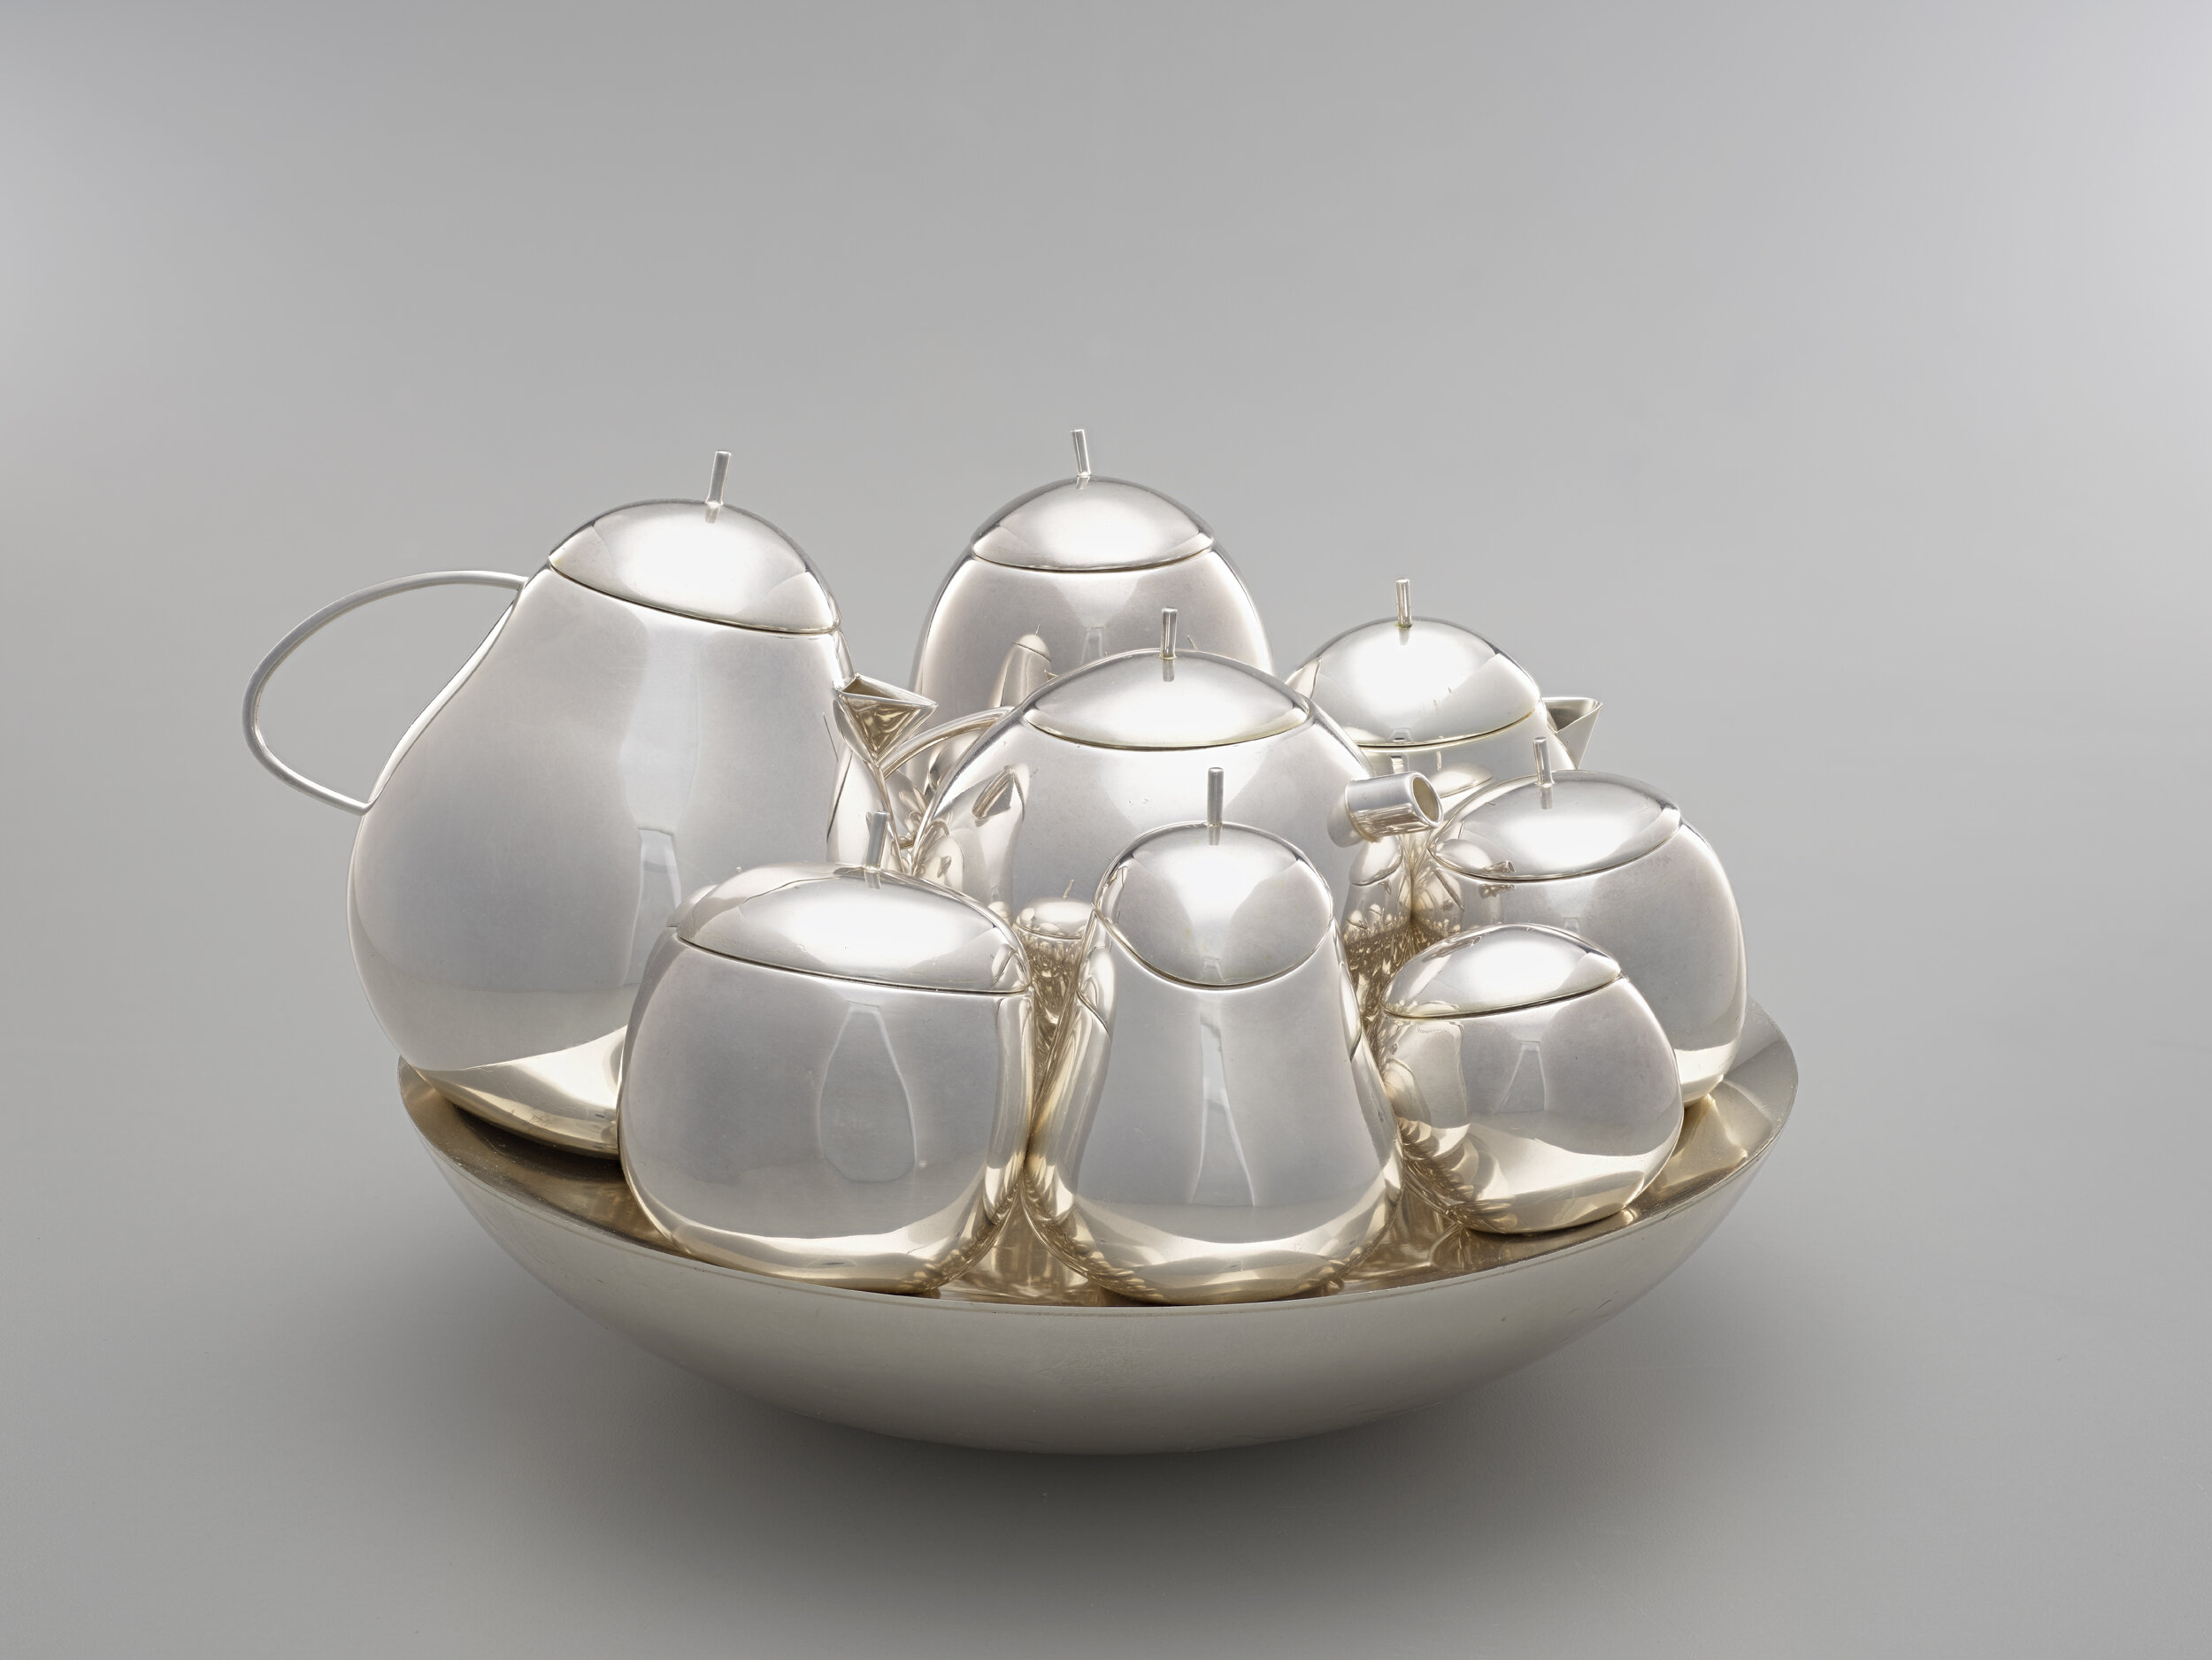  Sejima Kazuyo; Nishizawa Ryue, Coffee and Tea Service, 2003, sterling silver, The Margo Grant Walsh 20th Century Silver and Metalworks Collection, © artist or other rights holder, 2005.84.1A-T 